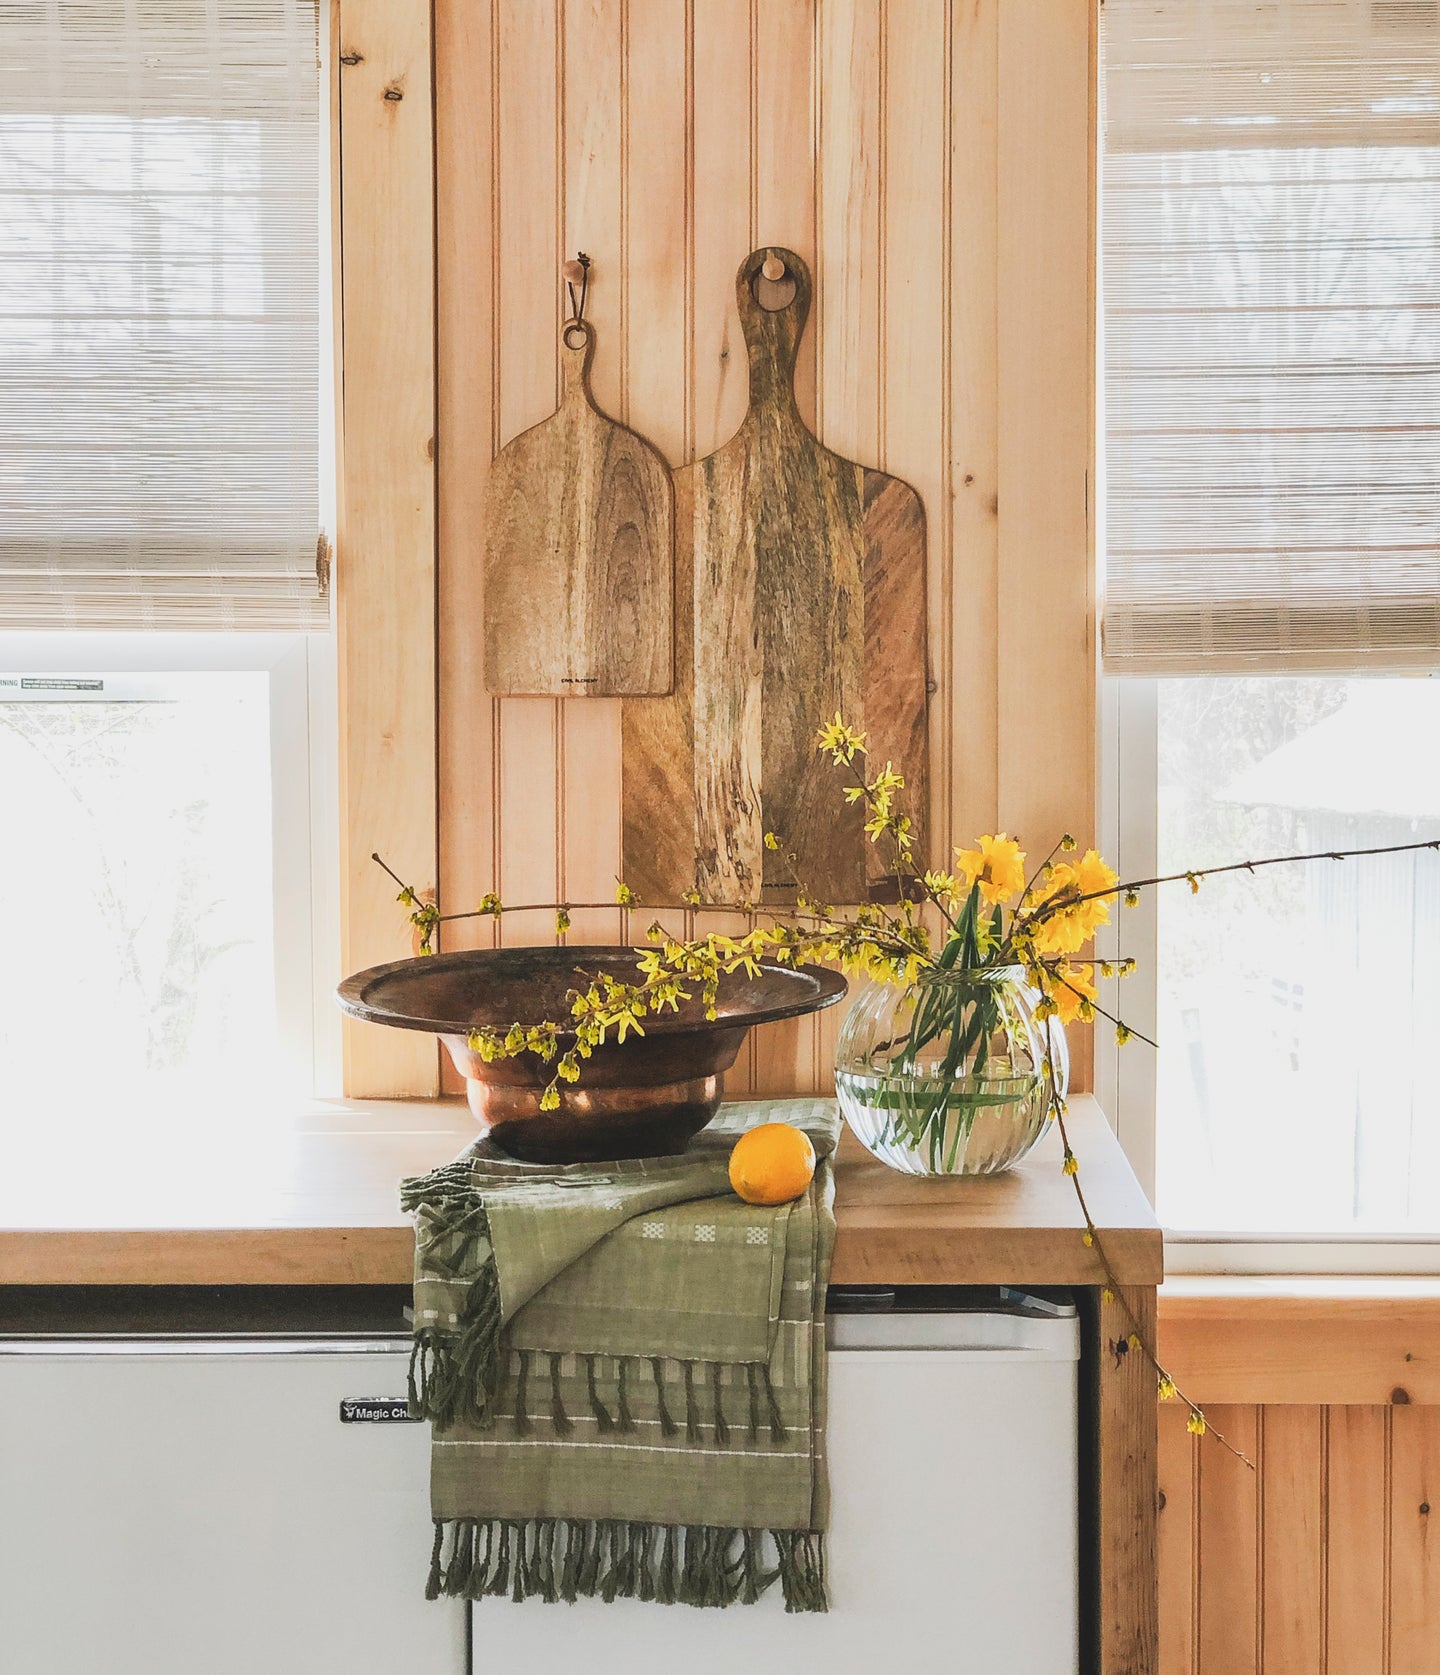 Introducing fresh handcrafted finds for your home and kitchen